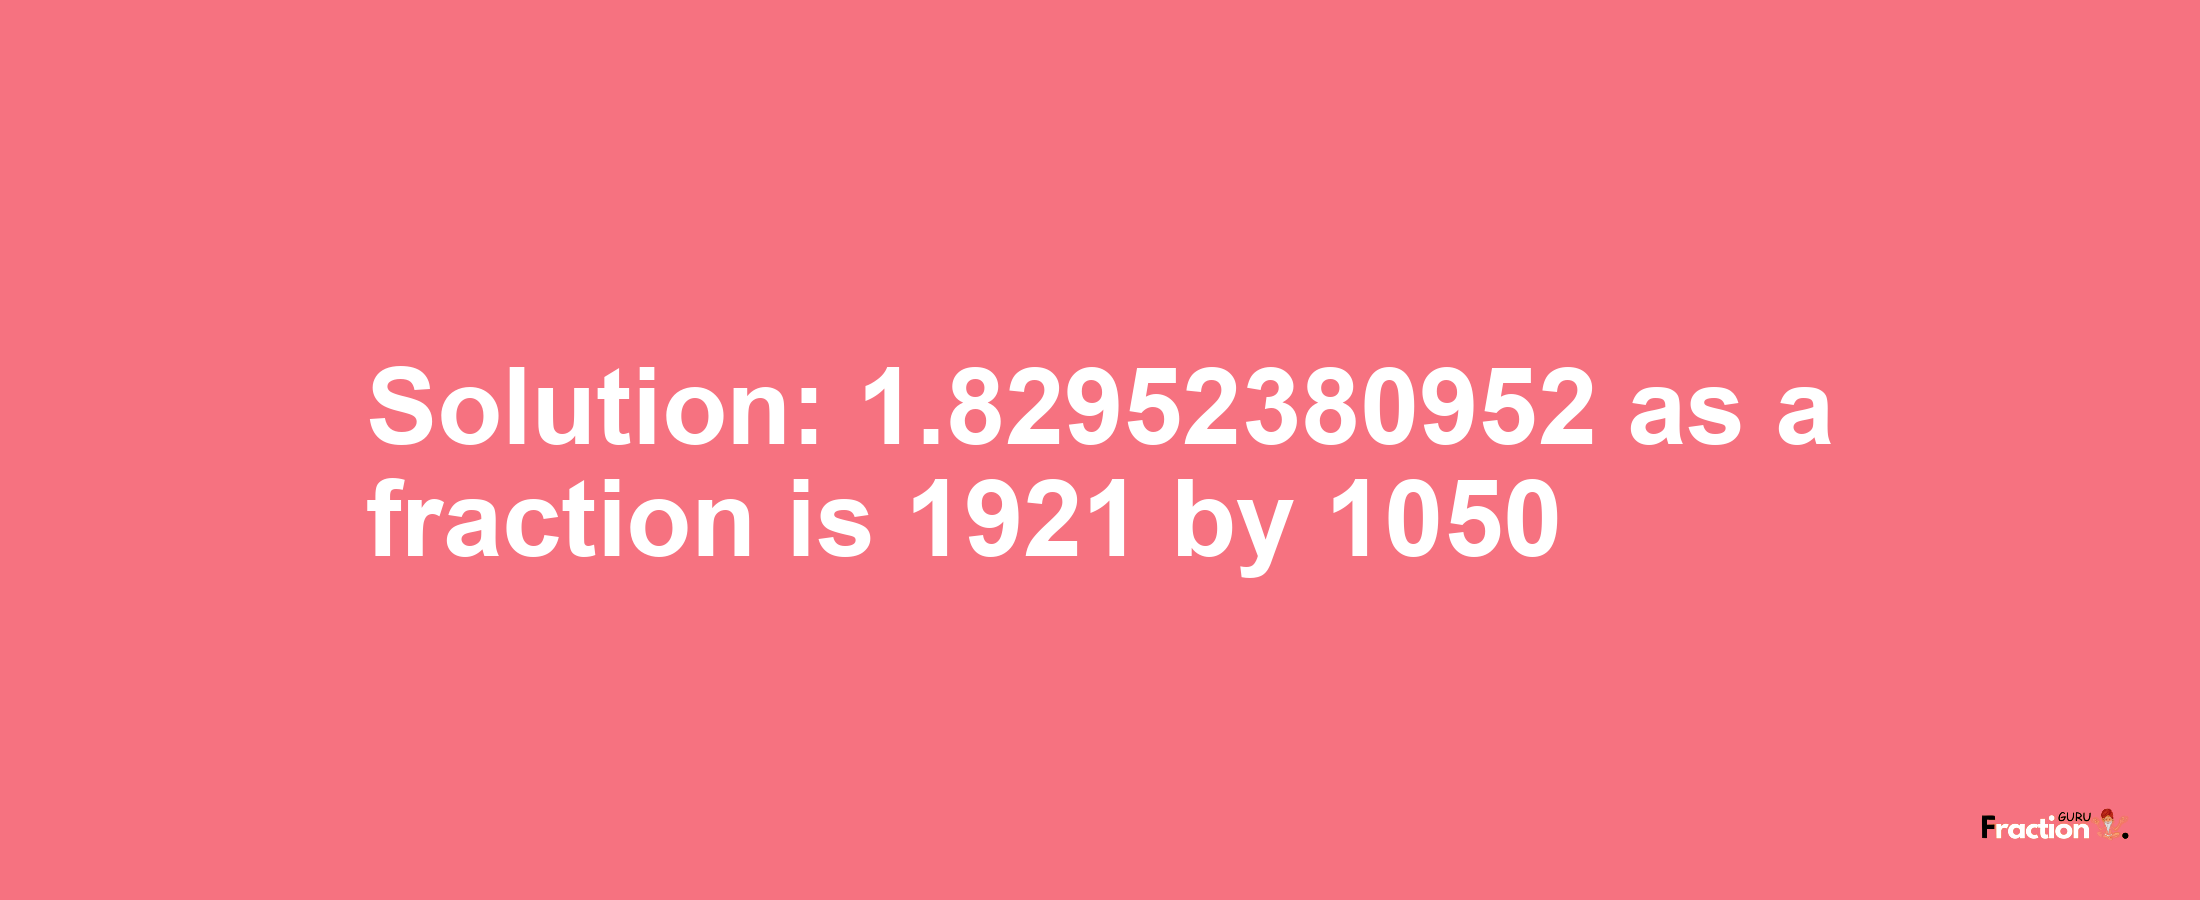 Solution:1.82952380952 as a fraction is 1921/1050